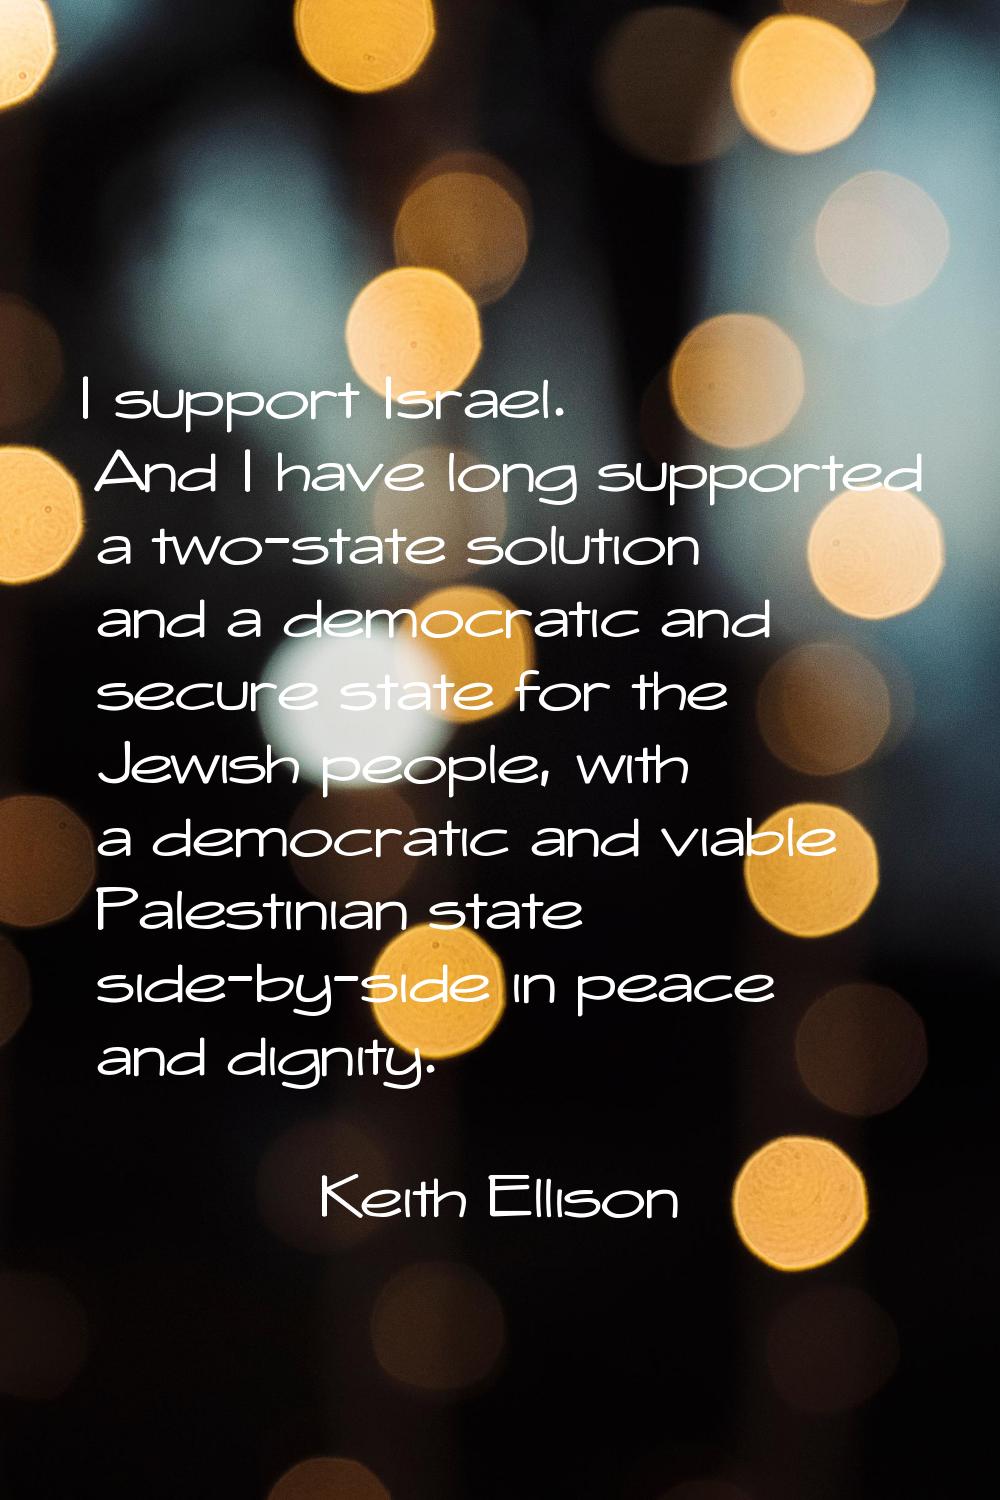 I support Israel. And I have long supported a two-state solution and a democratic and secure state 